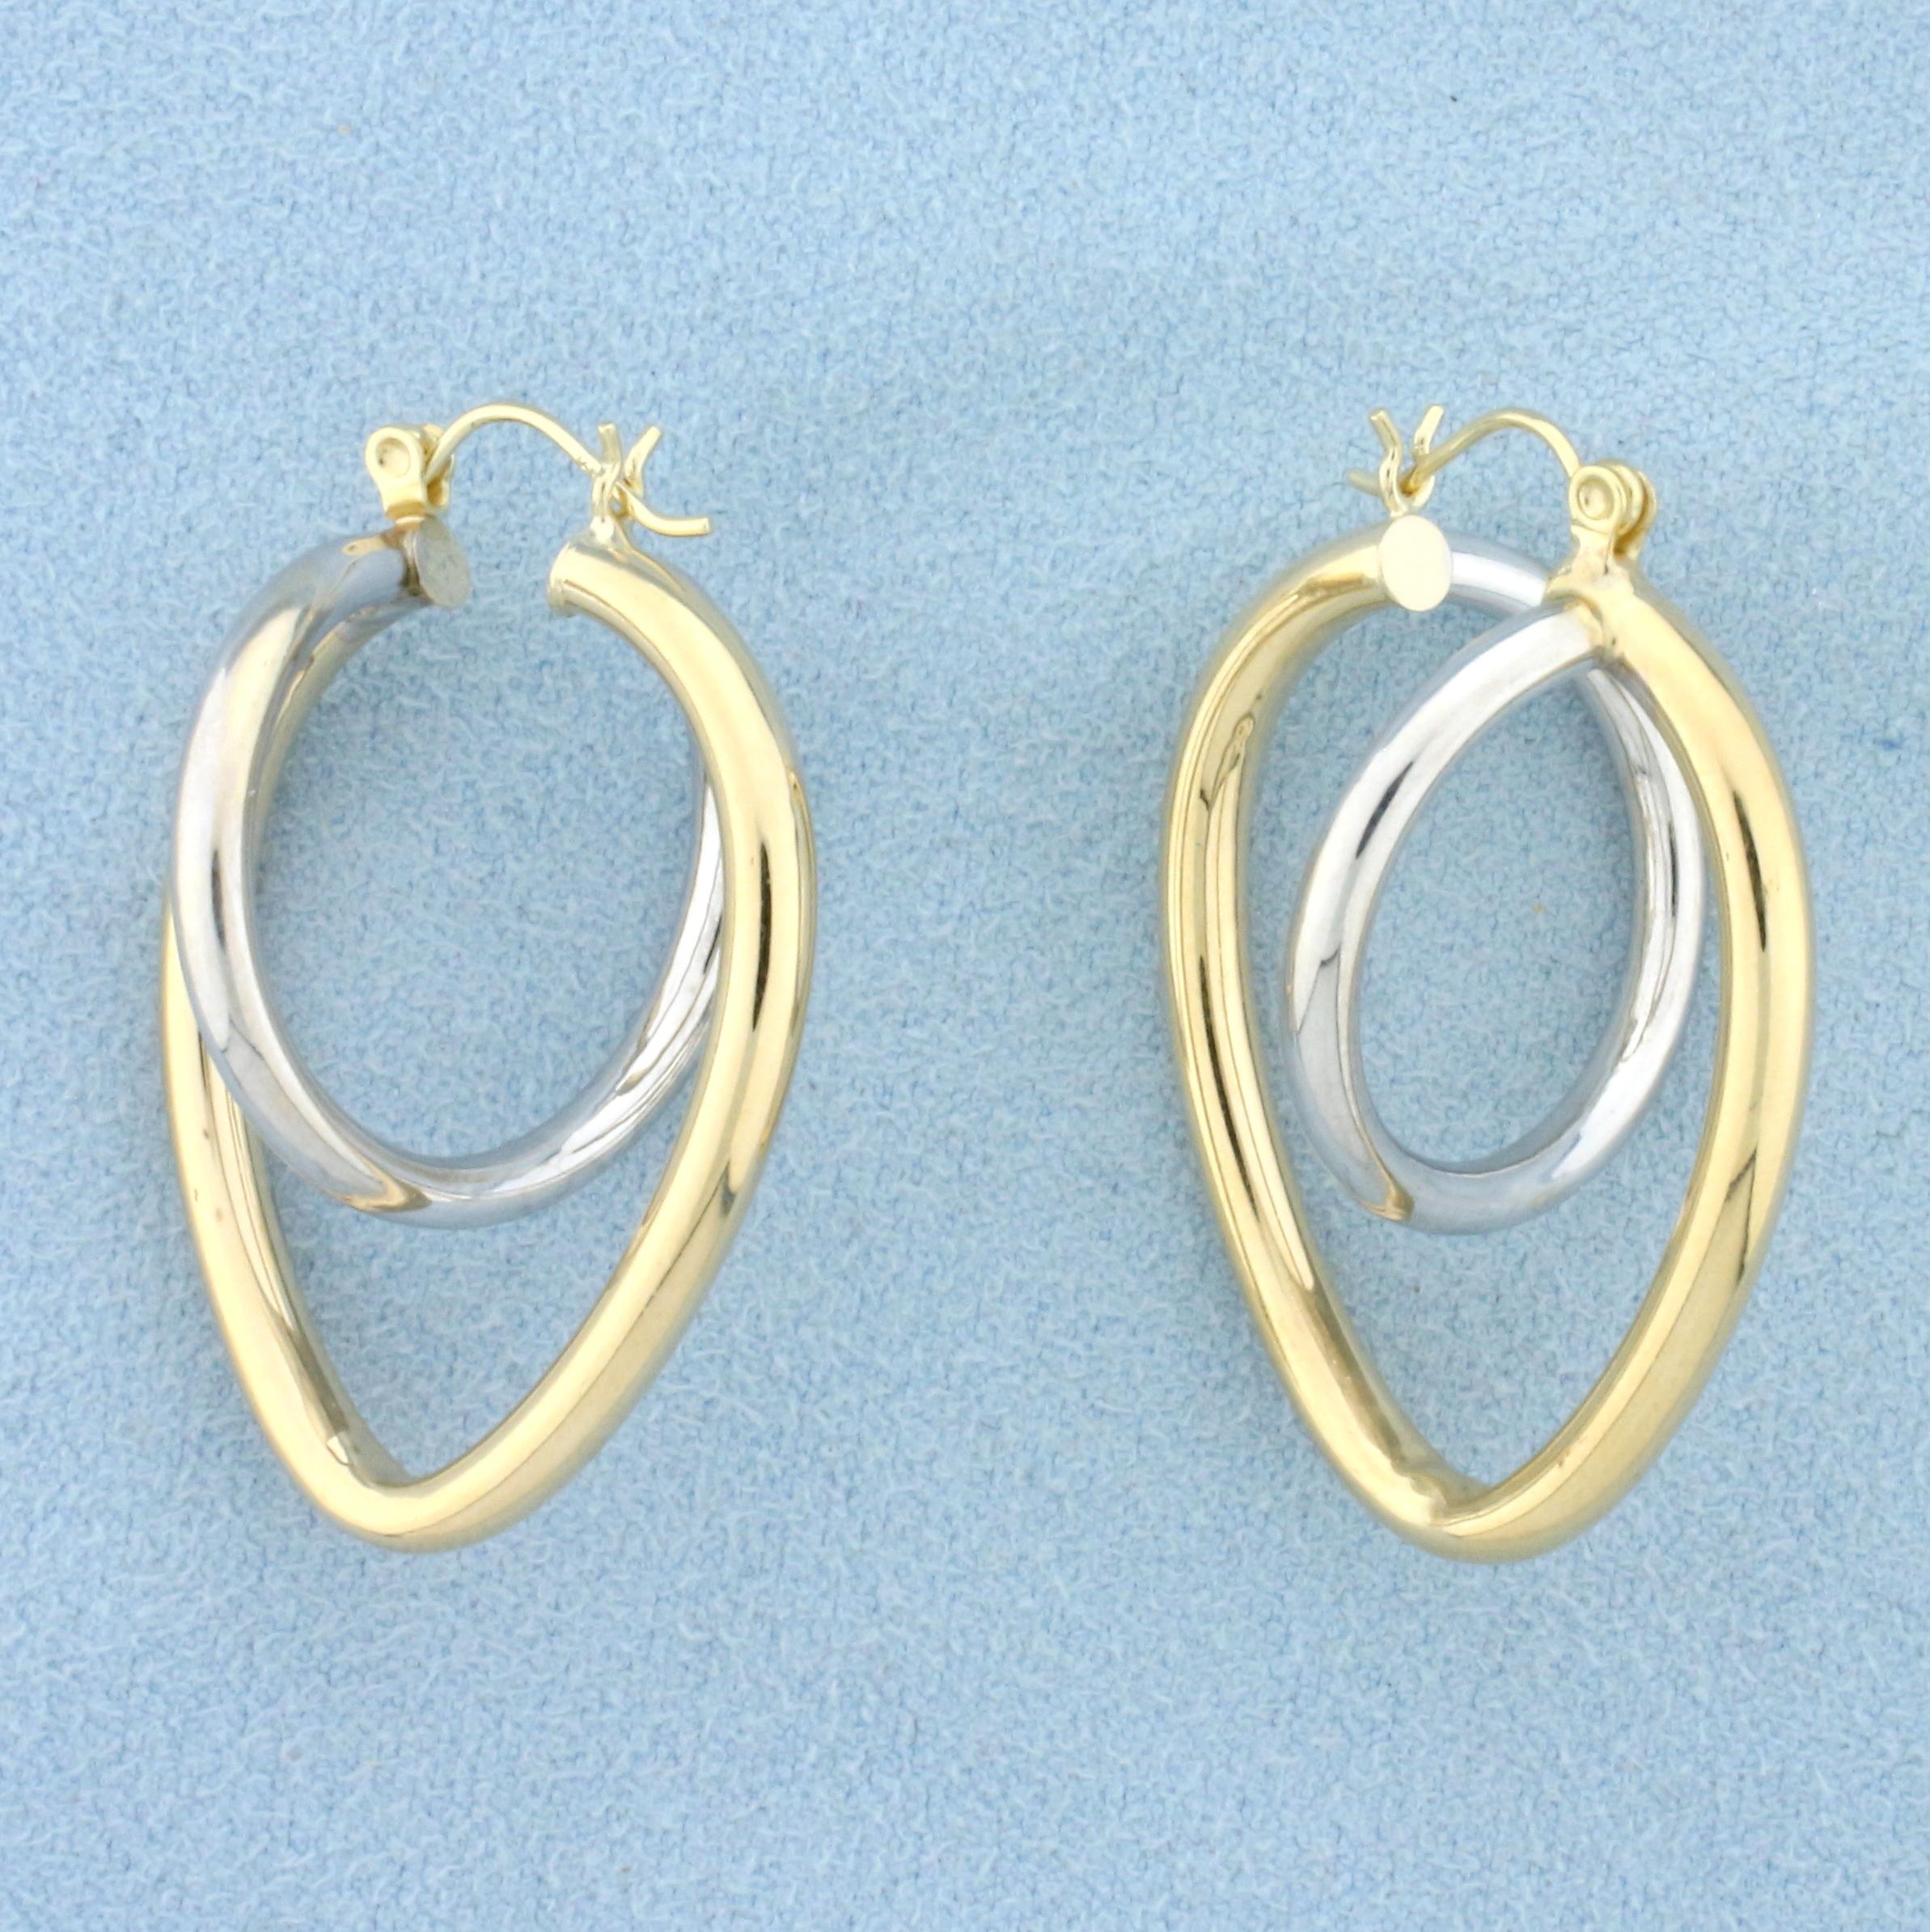 Abstract Heart Hoop Earrings In 14k White And Yellow Gold